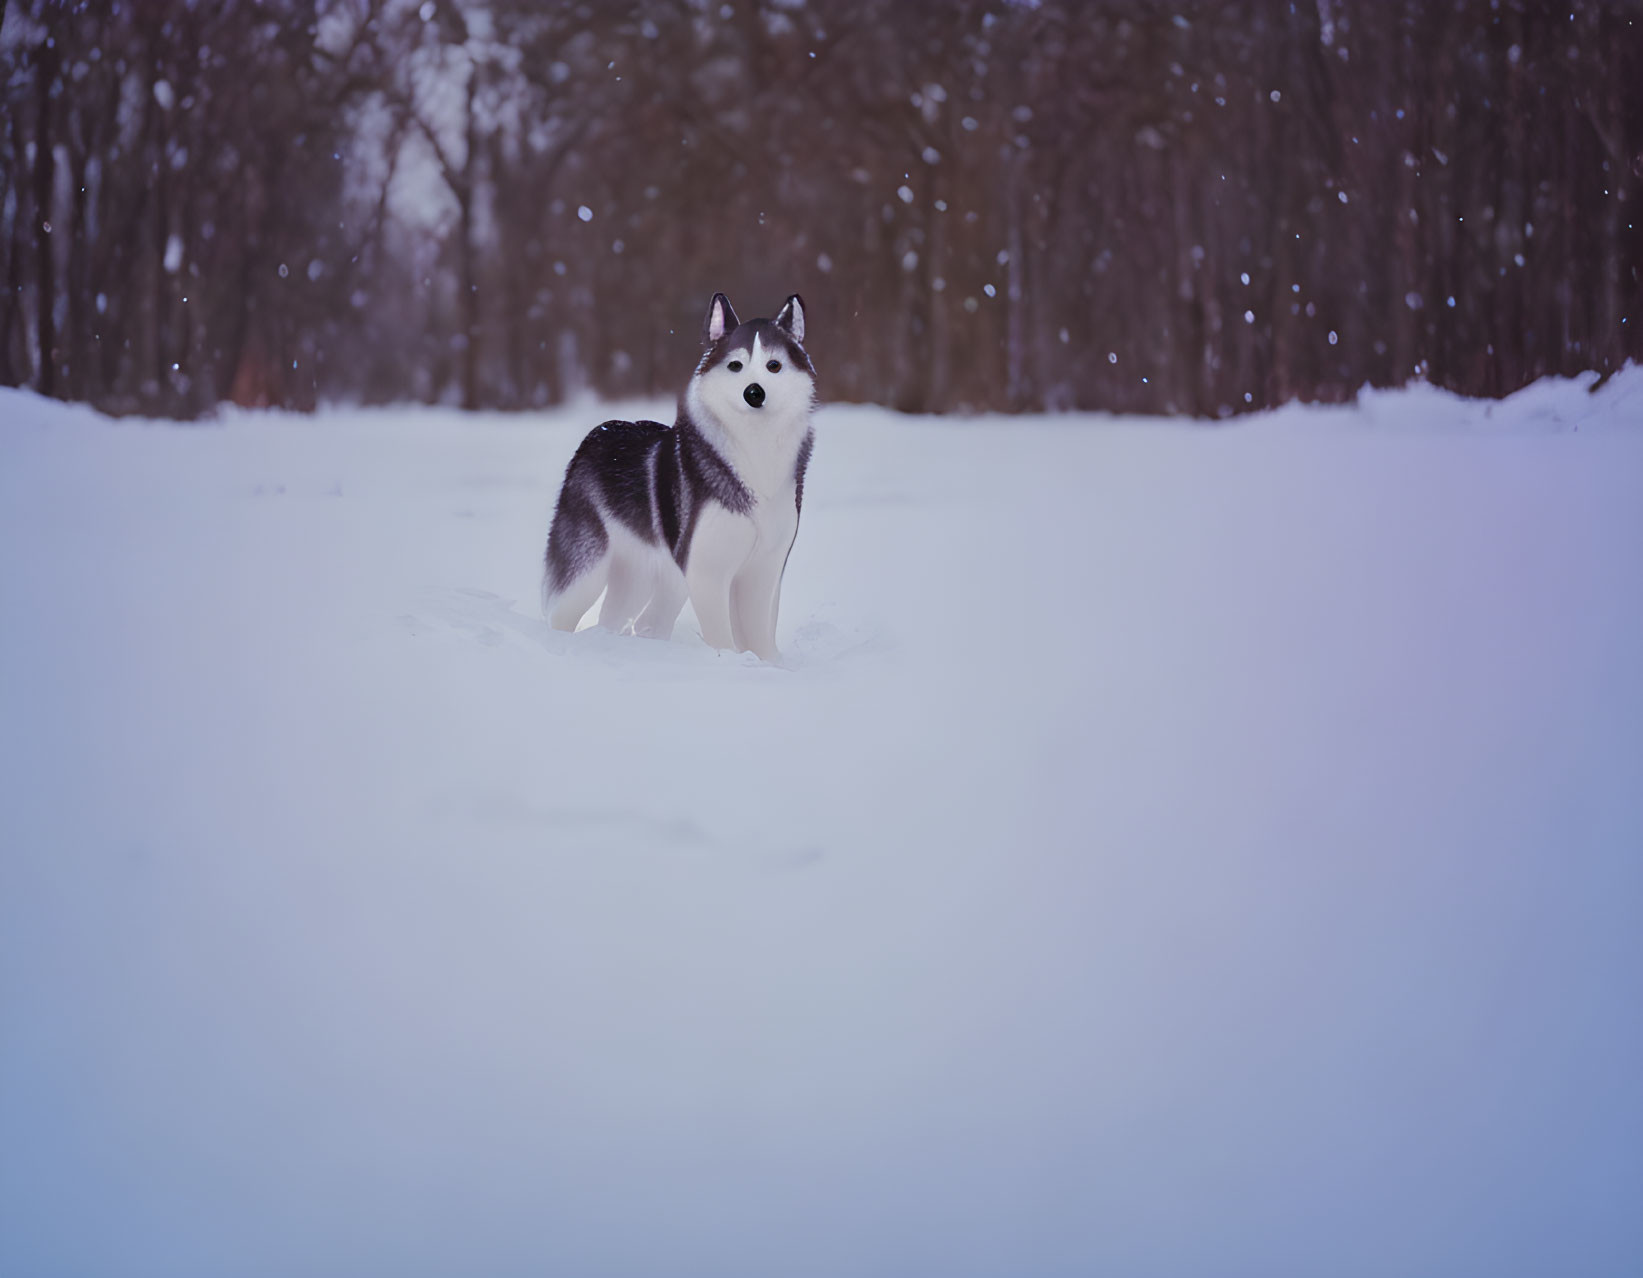 Husky playing in the snow ❄️